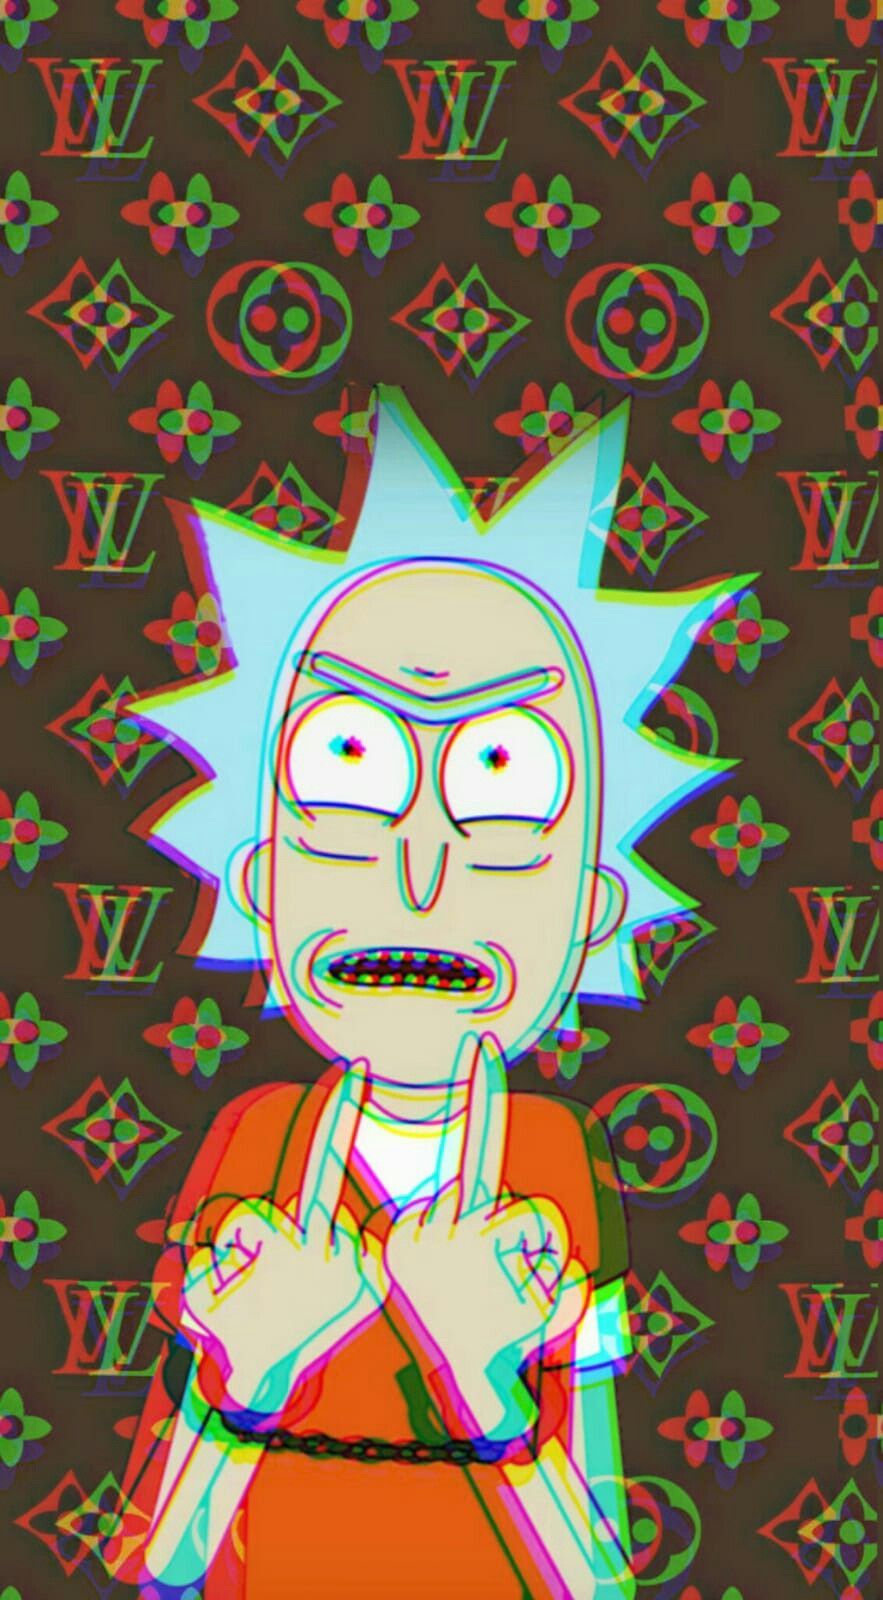 Rick and Morty Phone Wallpapers on WallpaperDog